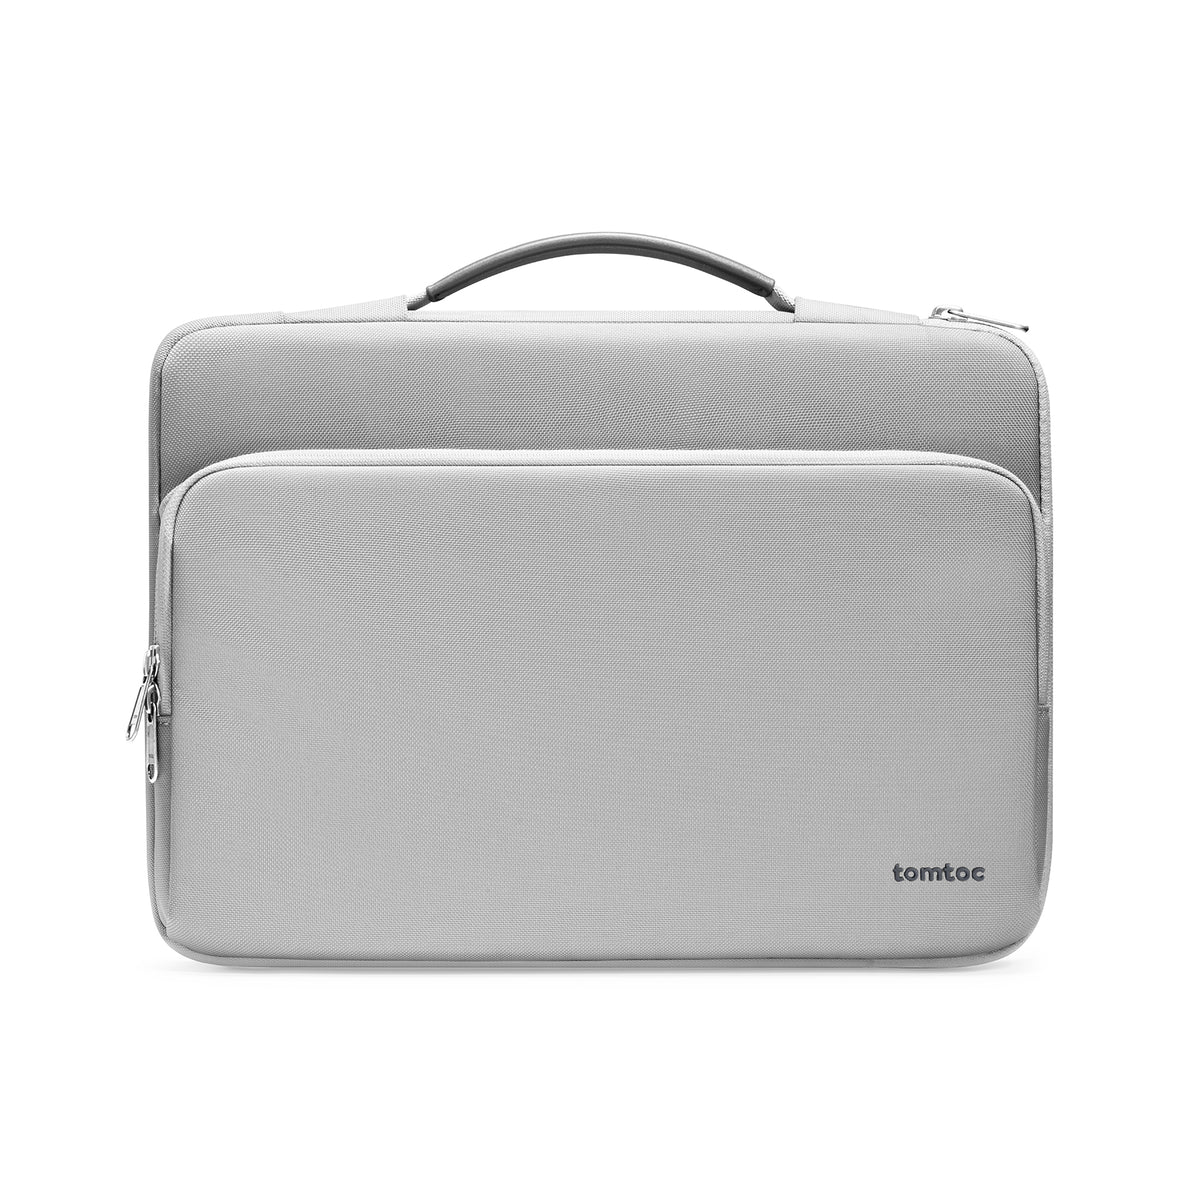 tomtoc 15 Inch Versatile 360 Protective Laptop Sleeve Briefcase - Gray